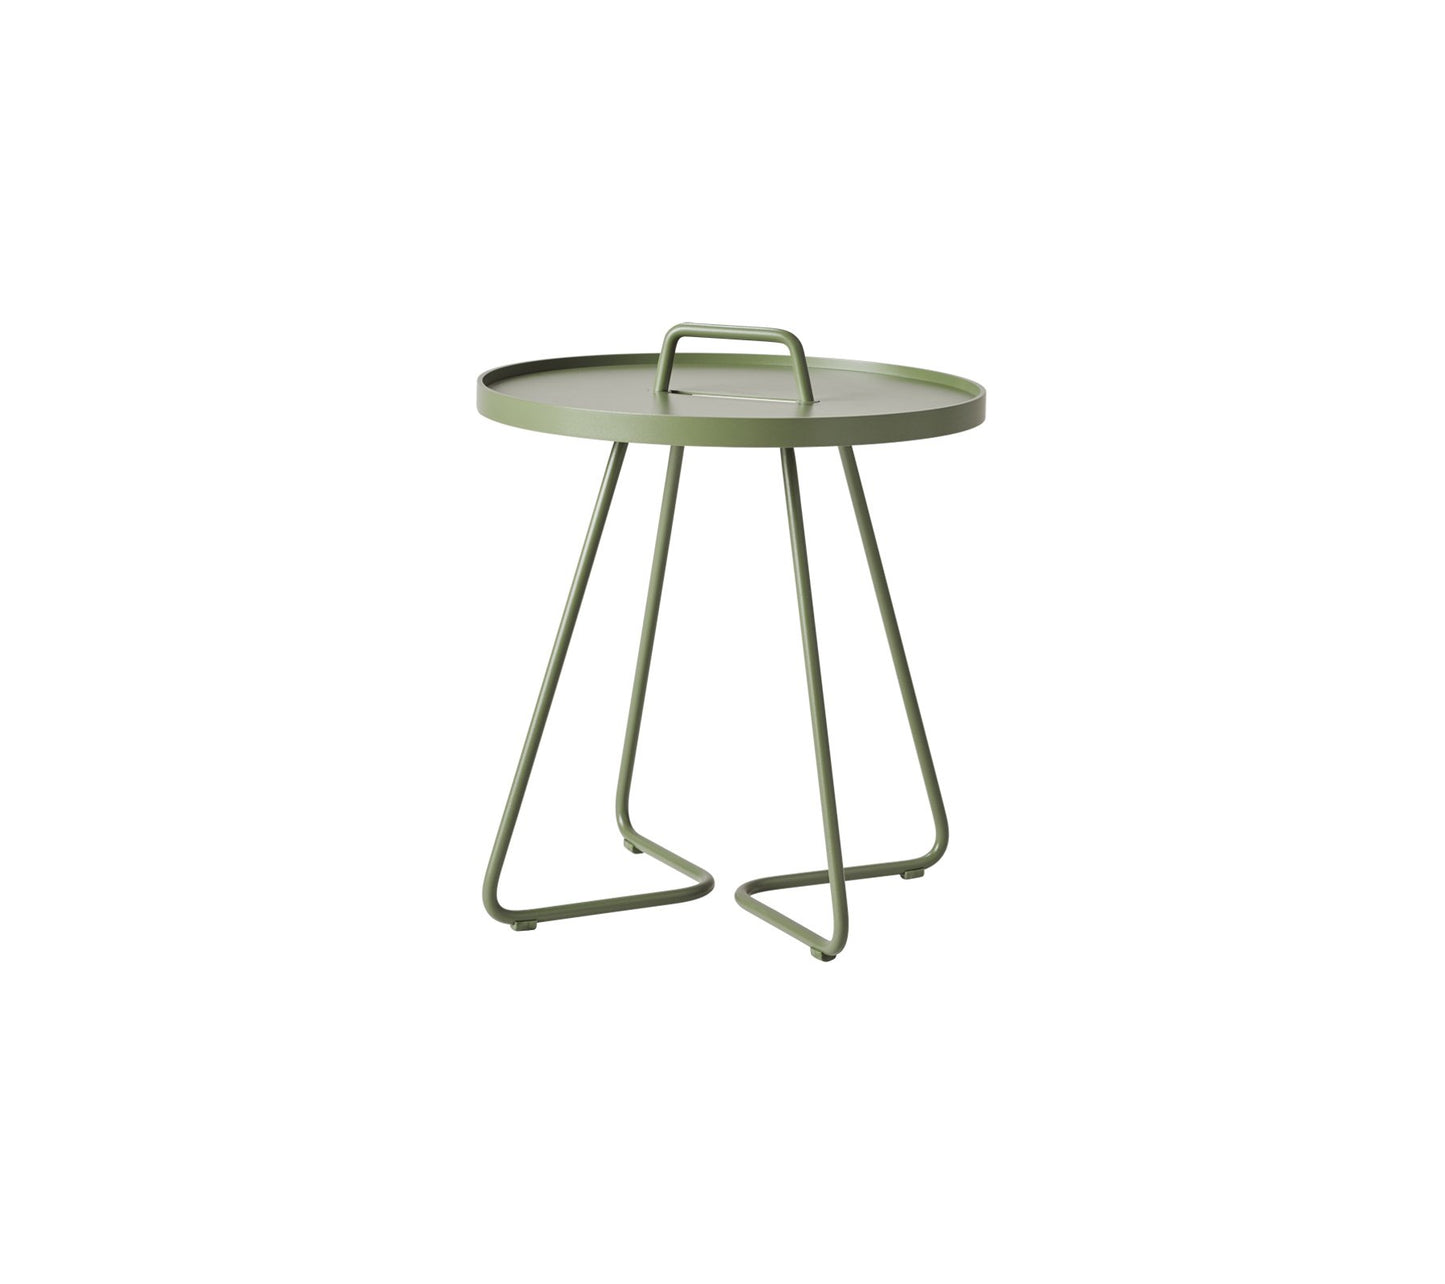 Cane-line On-the-Move Side Table Small